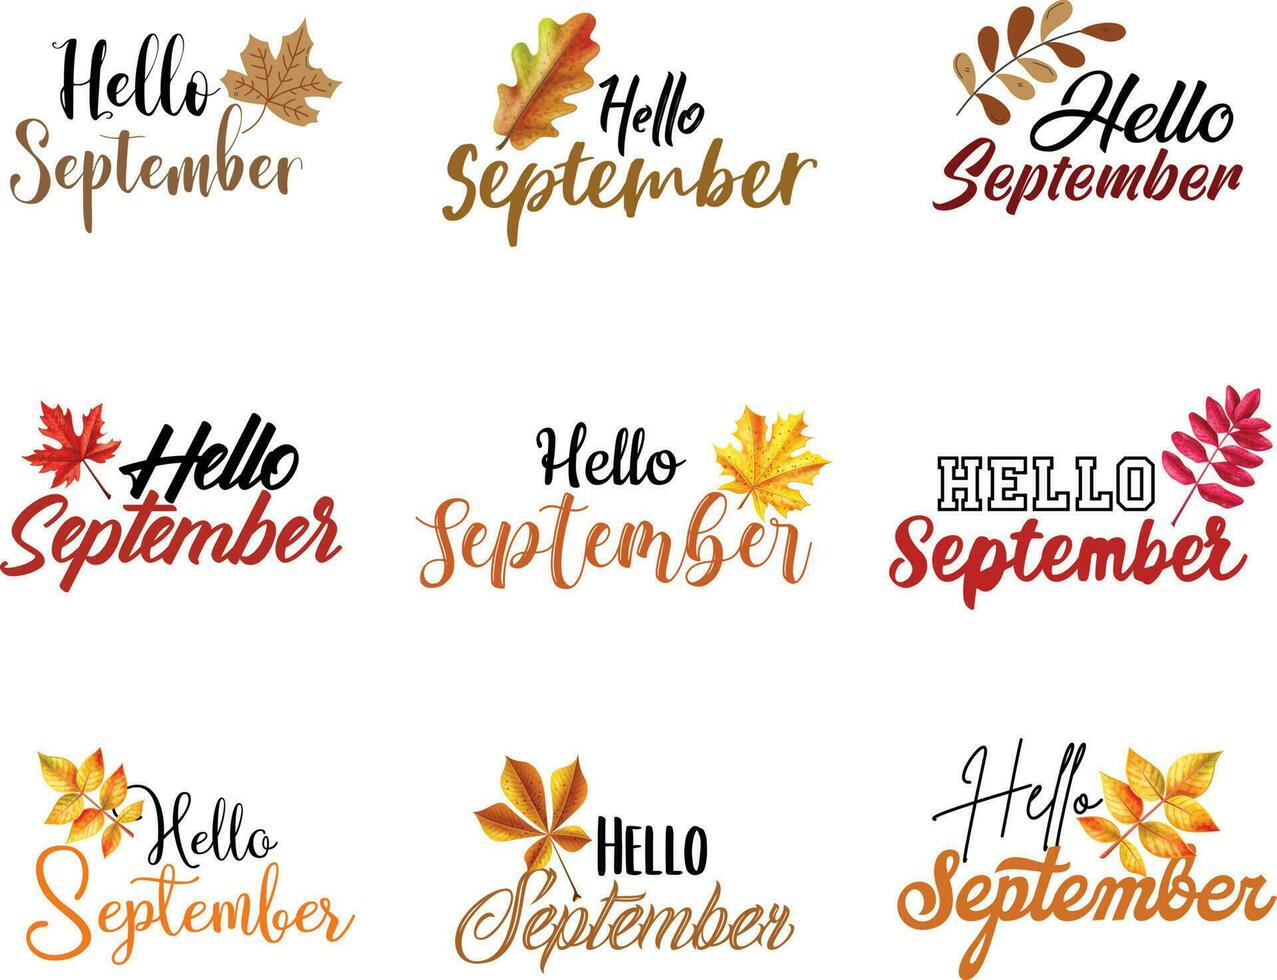 Hello September beautiful typography art with fall leaves, vector